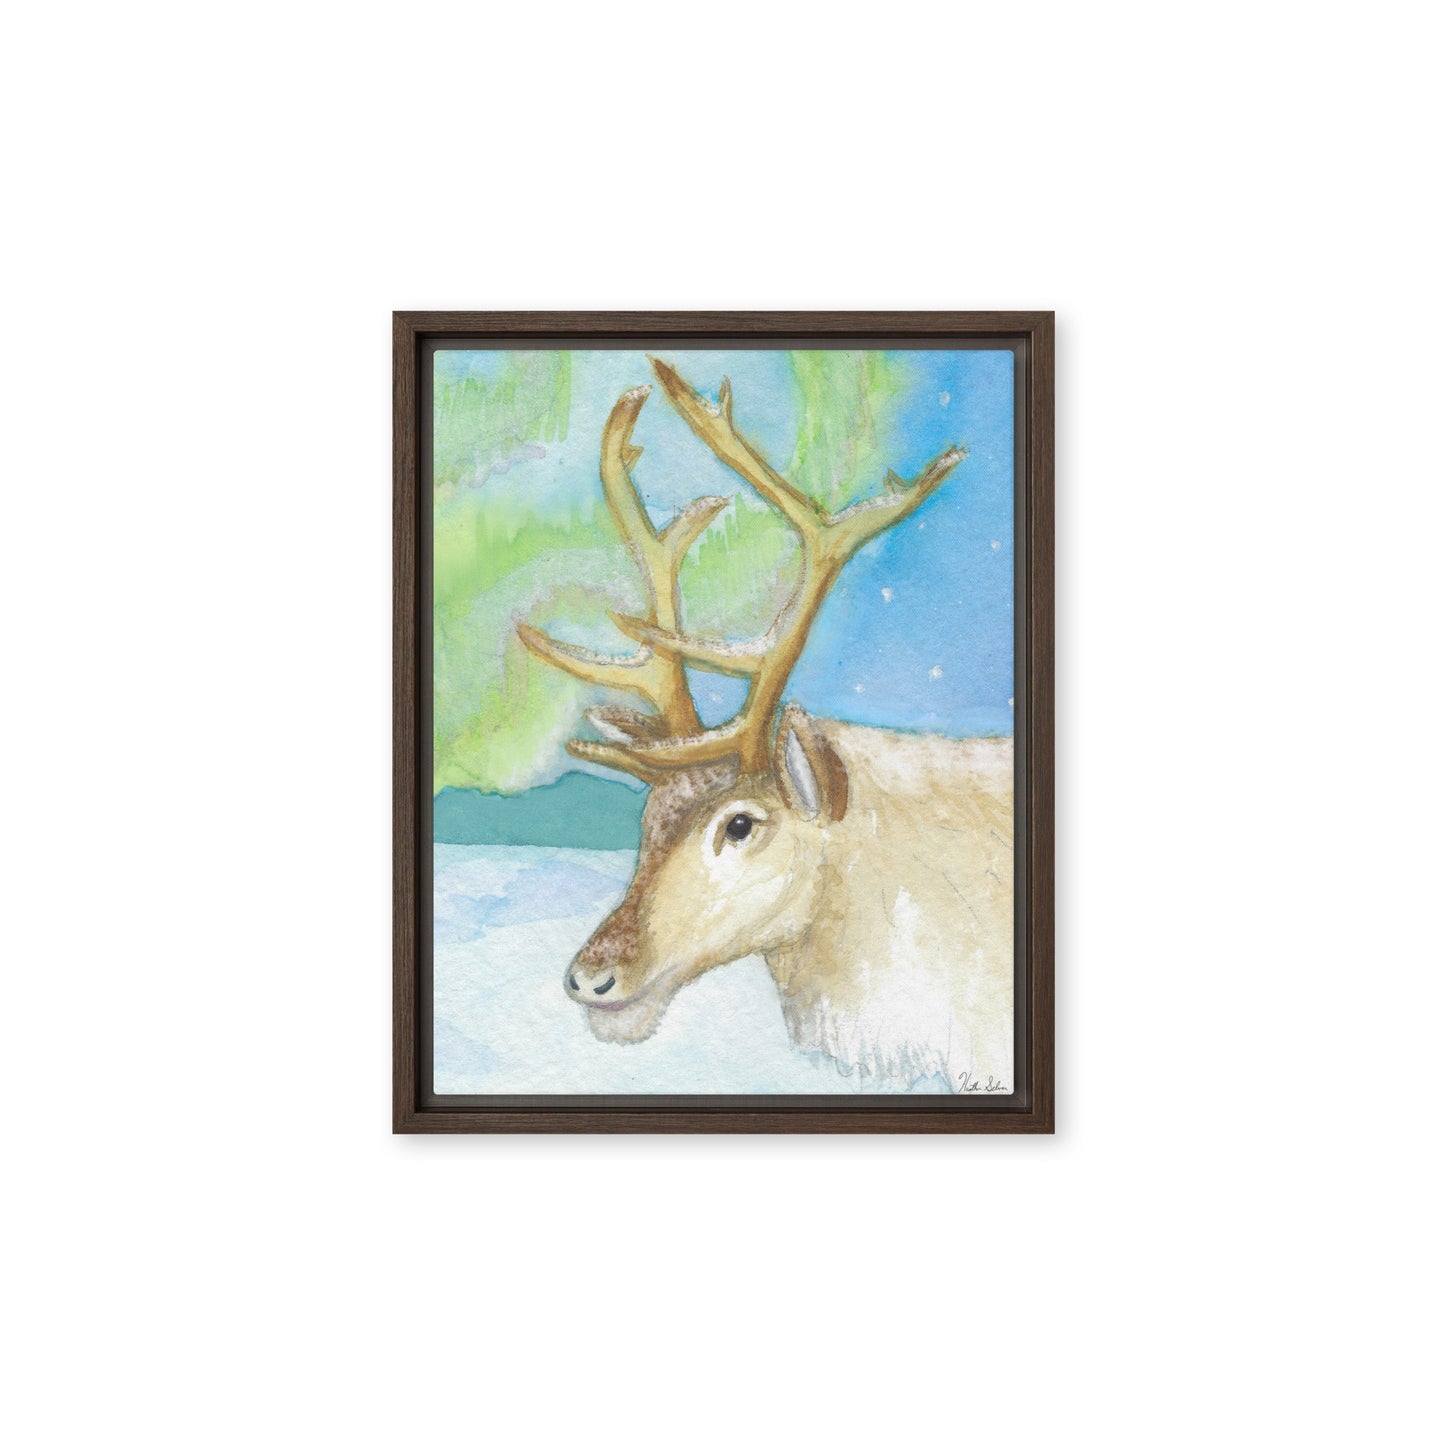 11 by 14 inch framed canvas art print of Heather Silver's Northern Lights Reindeer.  Canvas print mounted in a brown pine frame. Hanging hardware included.